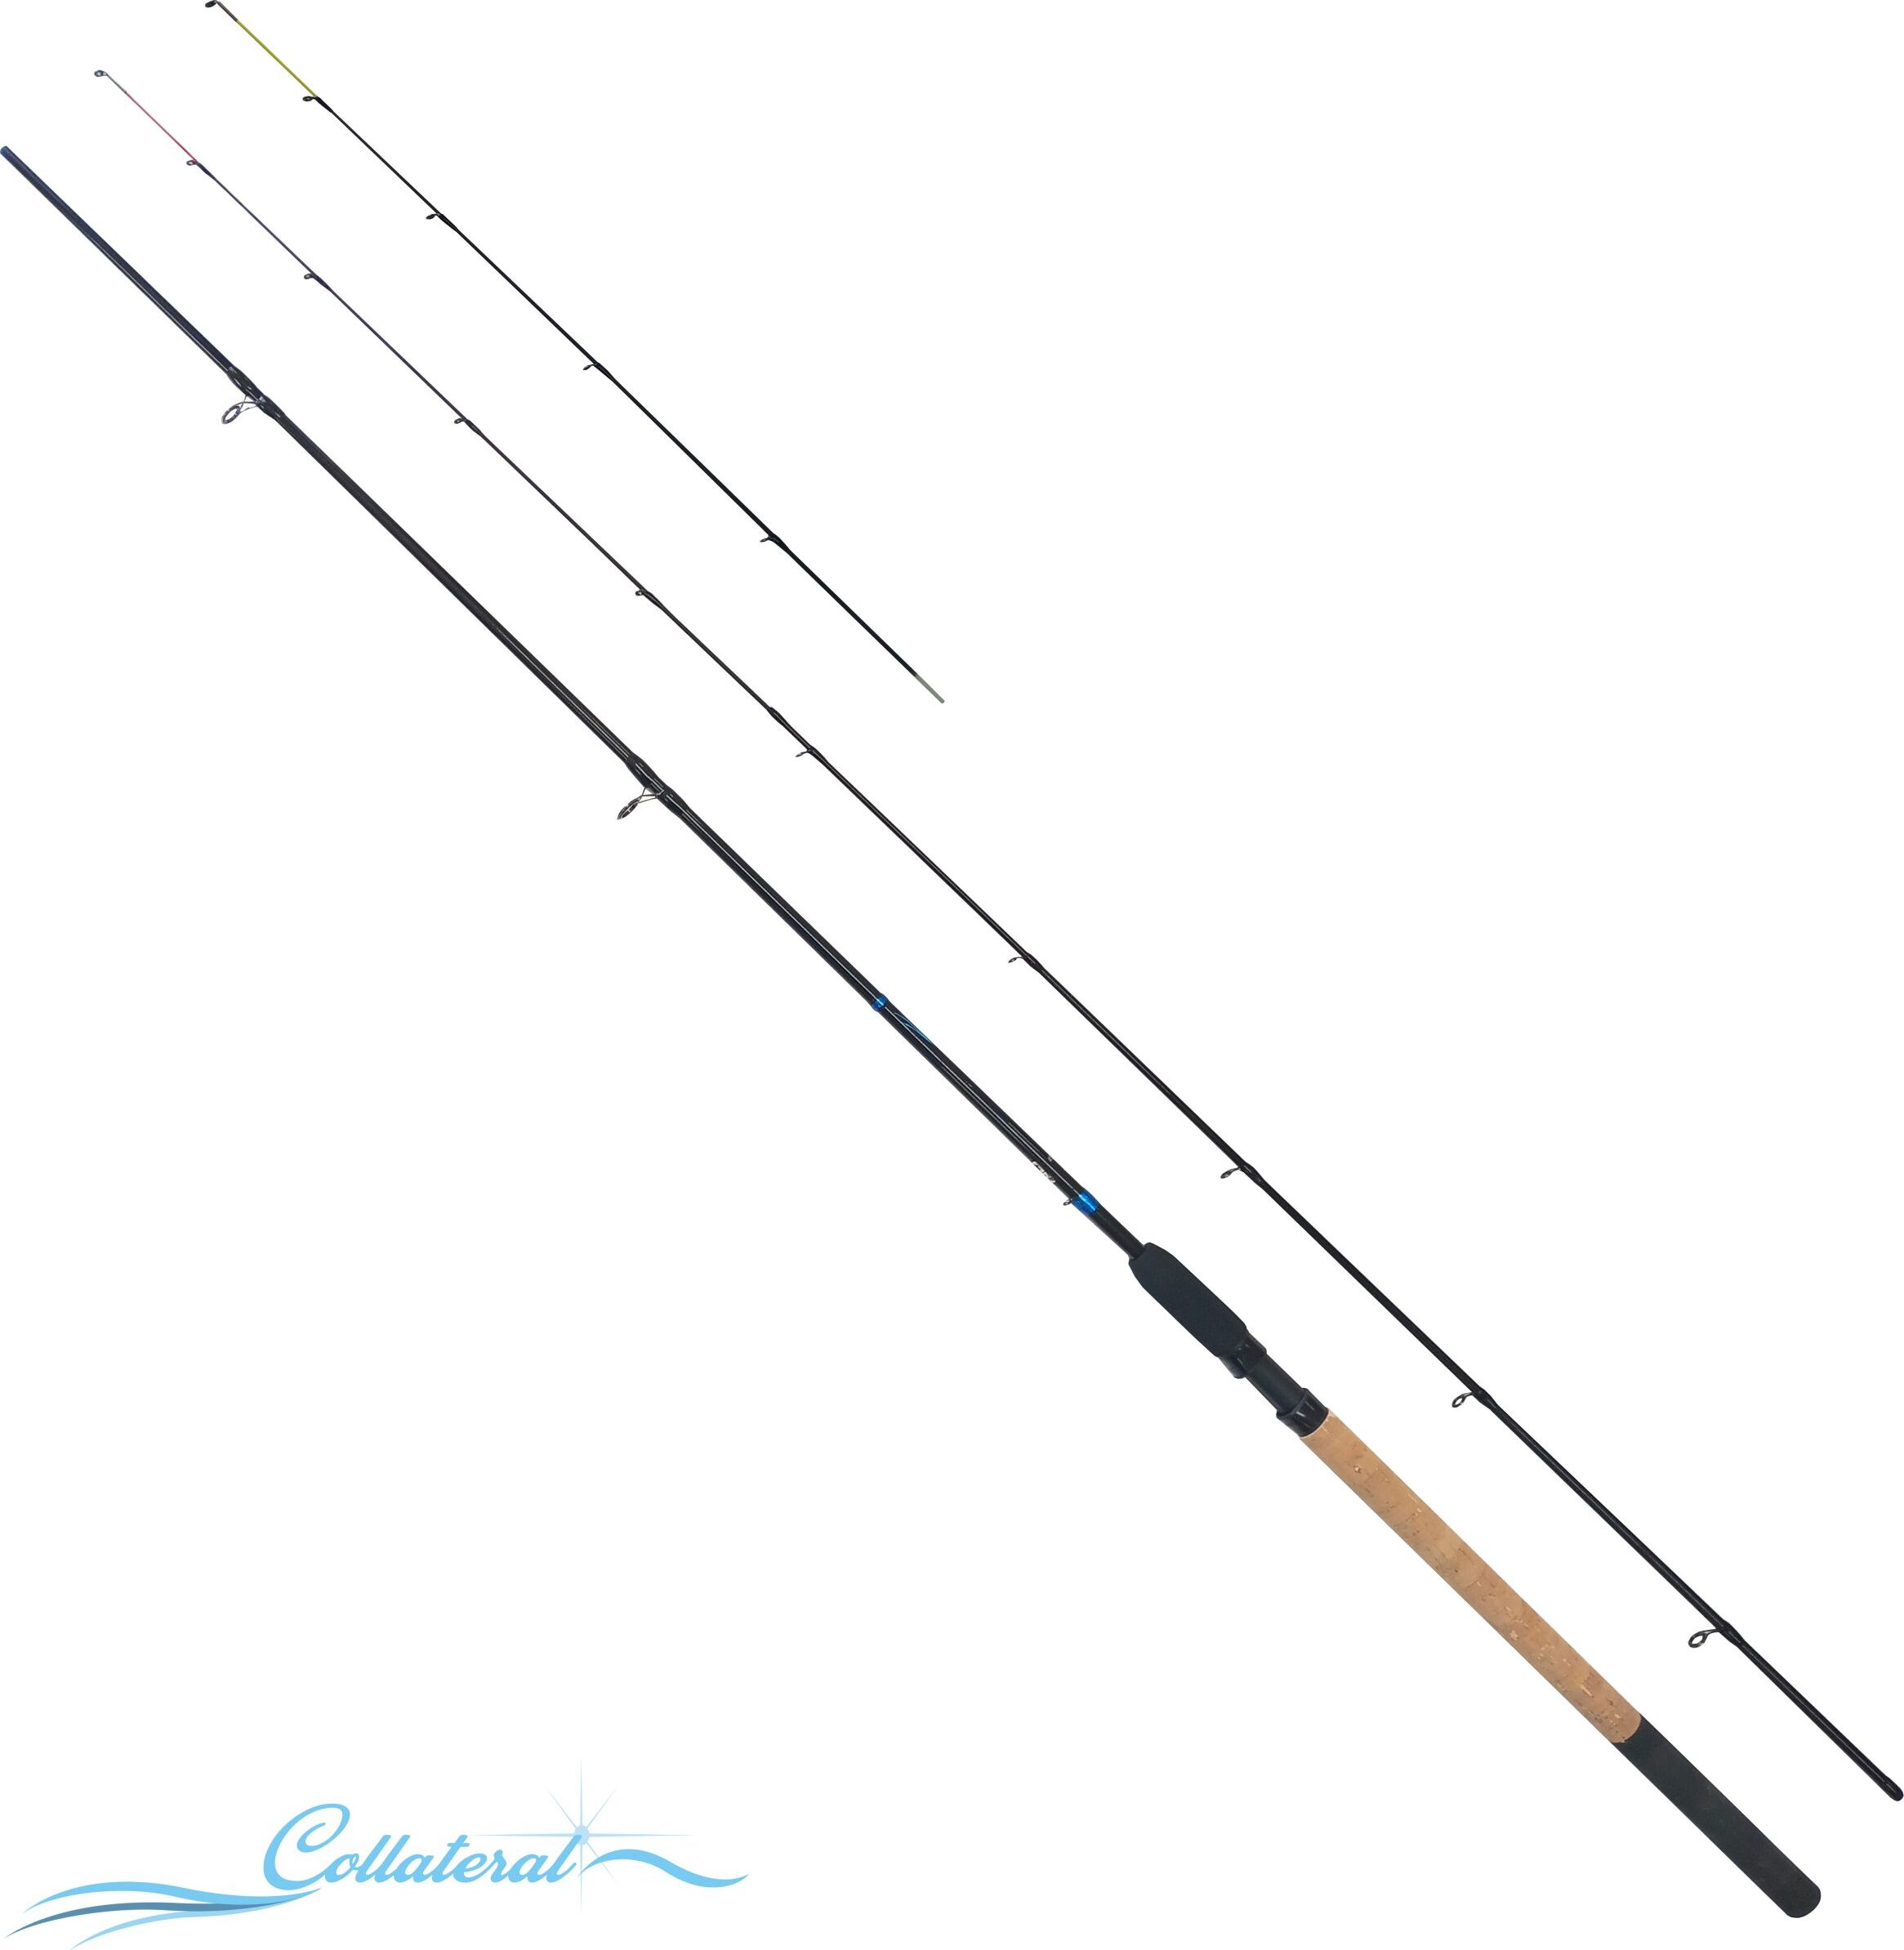 Collateral - 9ft / 2.7m 2 Piece Feeder Fishing Rod/Quiver/Leger With 2 Quiver Tips - One Full Carbon & One Fibreglass - Ideal For Bottom Feeding